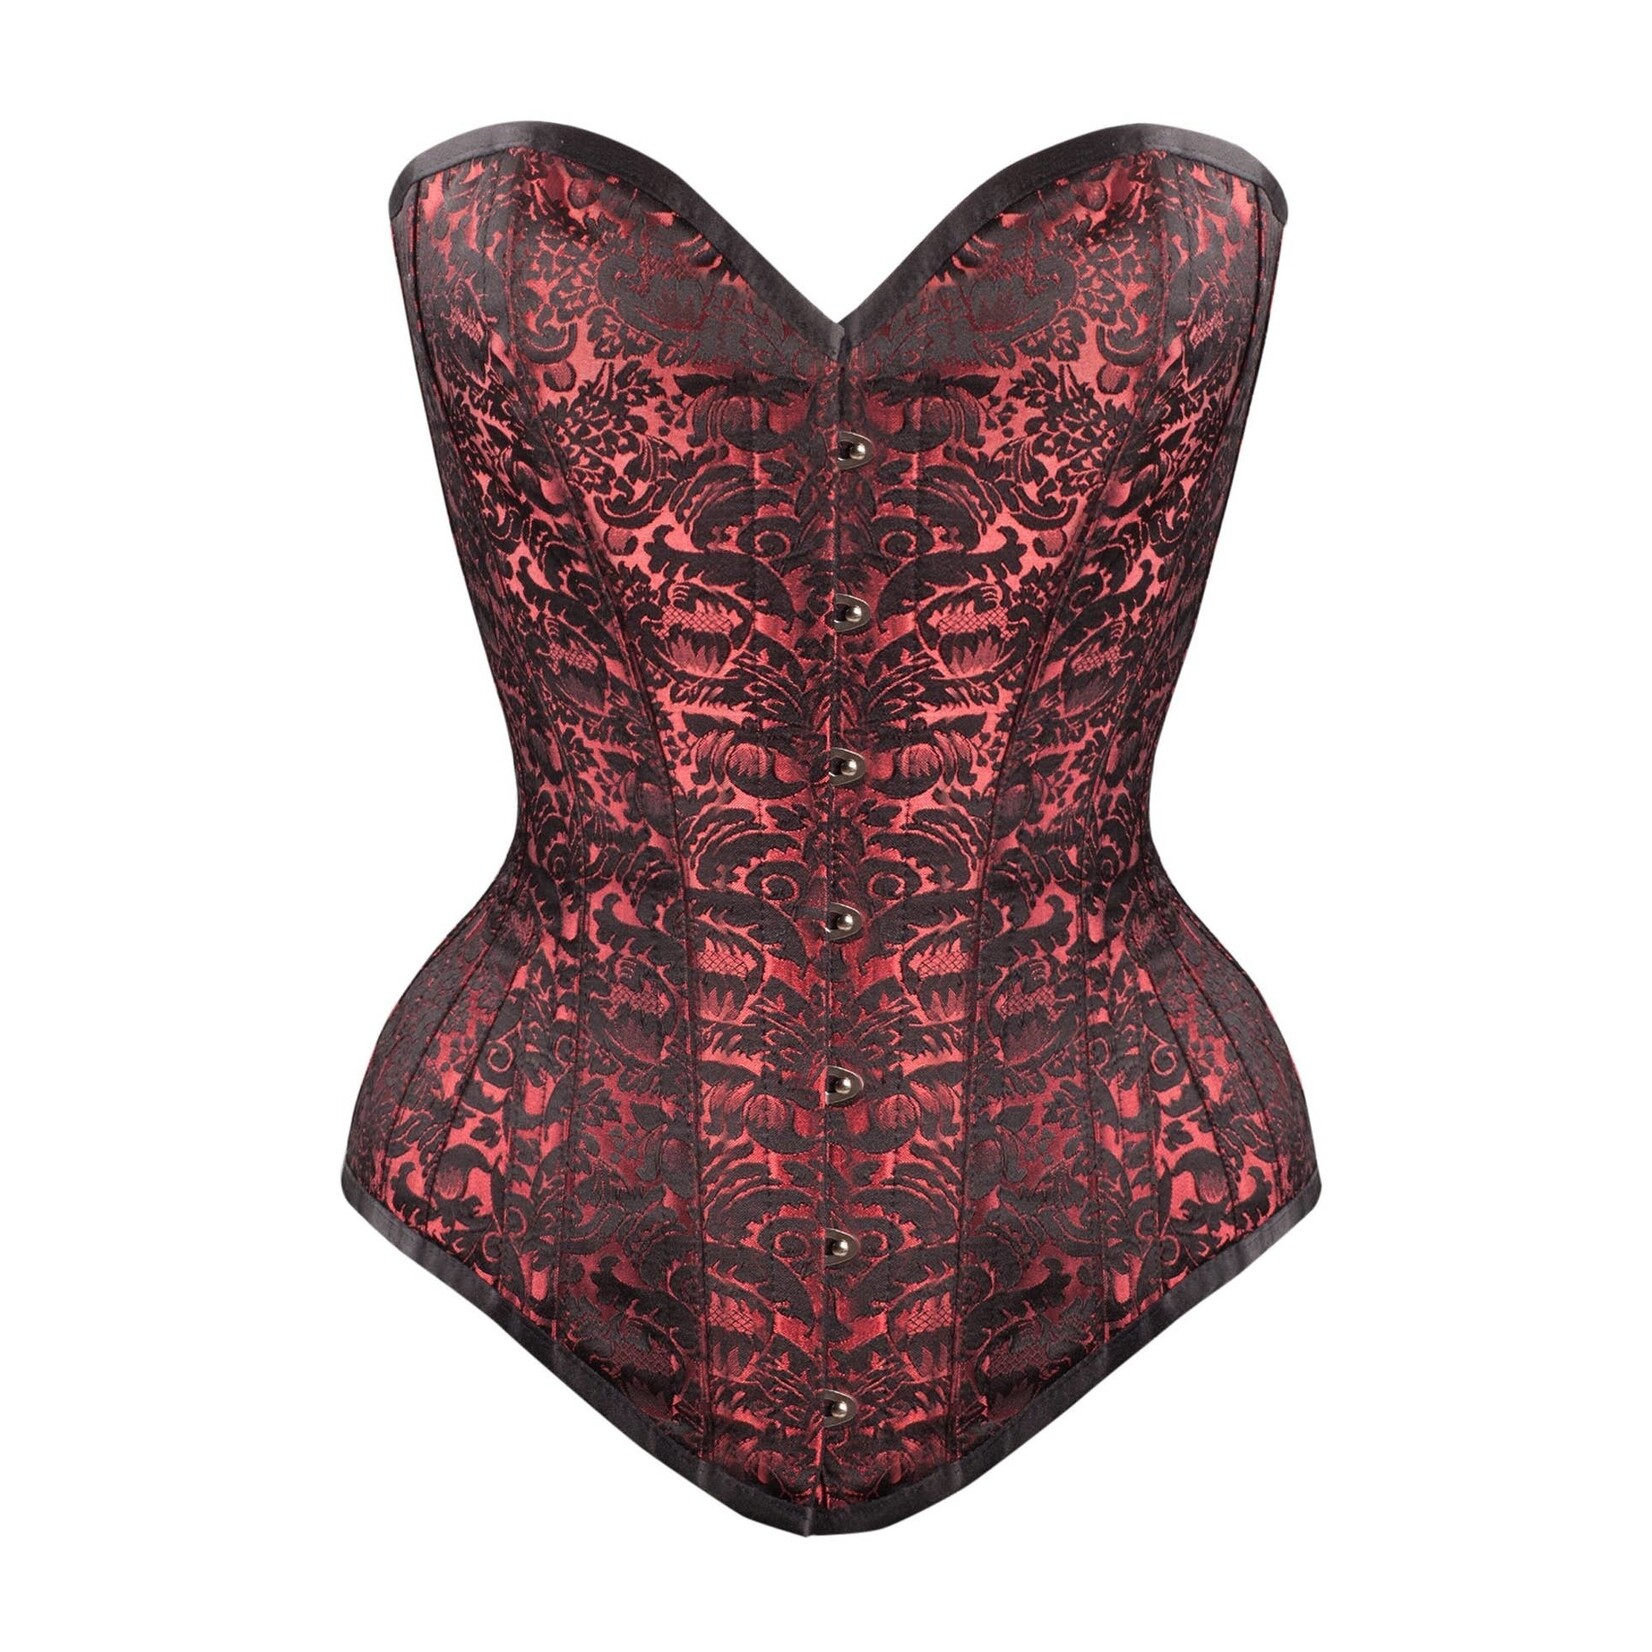 Corset Story Long Red Brocade Corset w/ Hip Gores 30in/33-34in